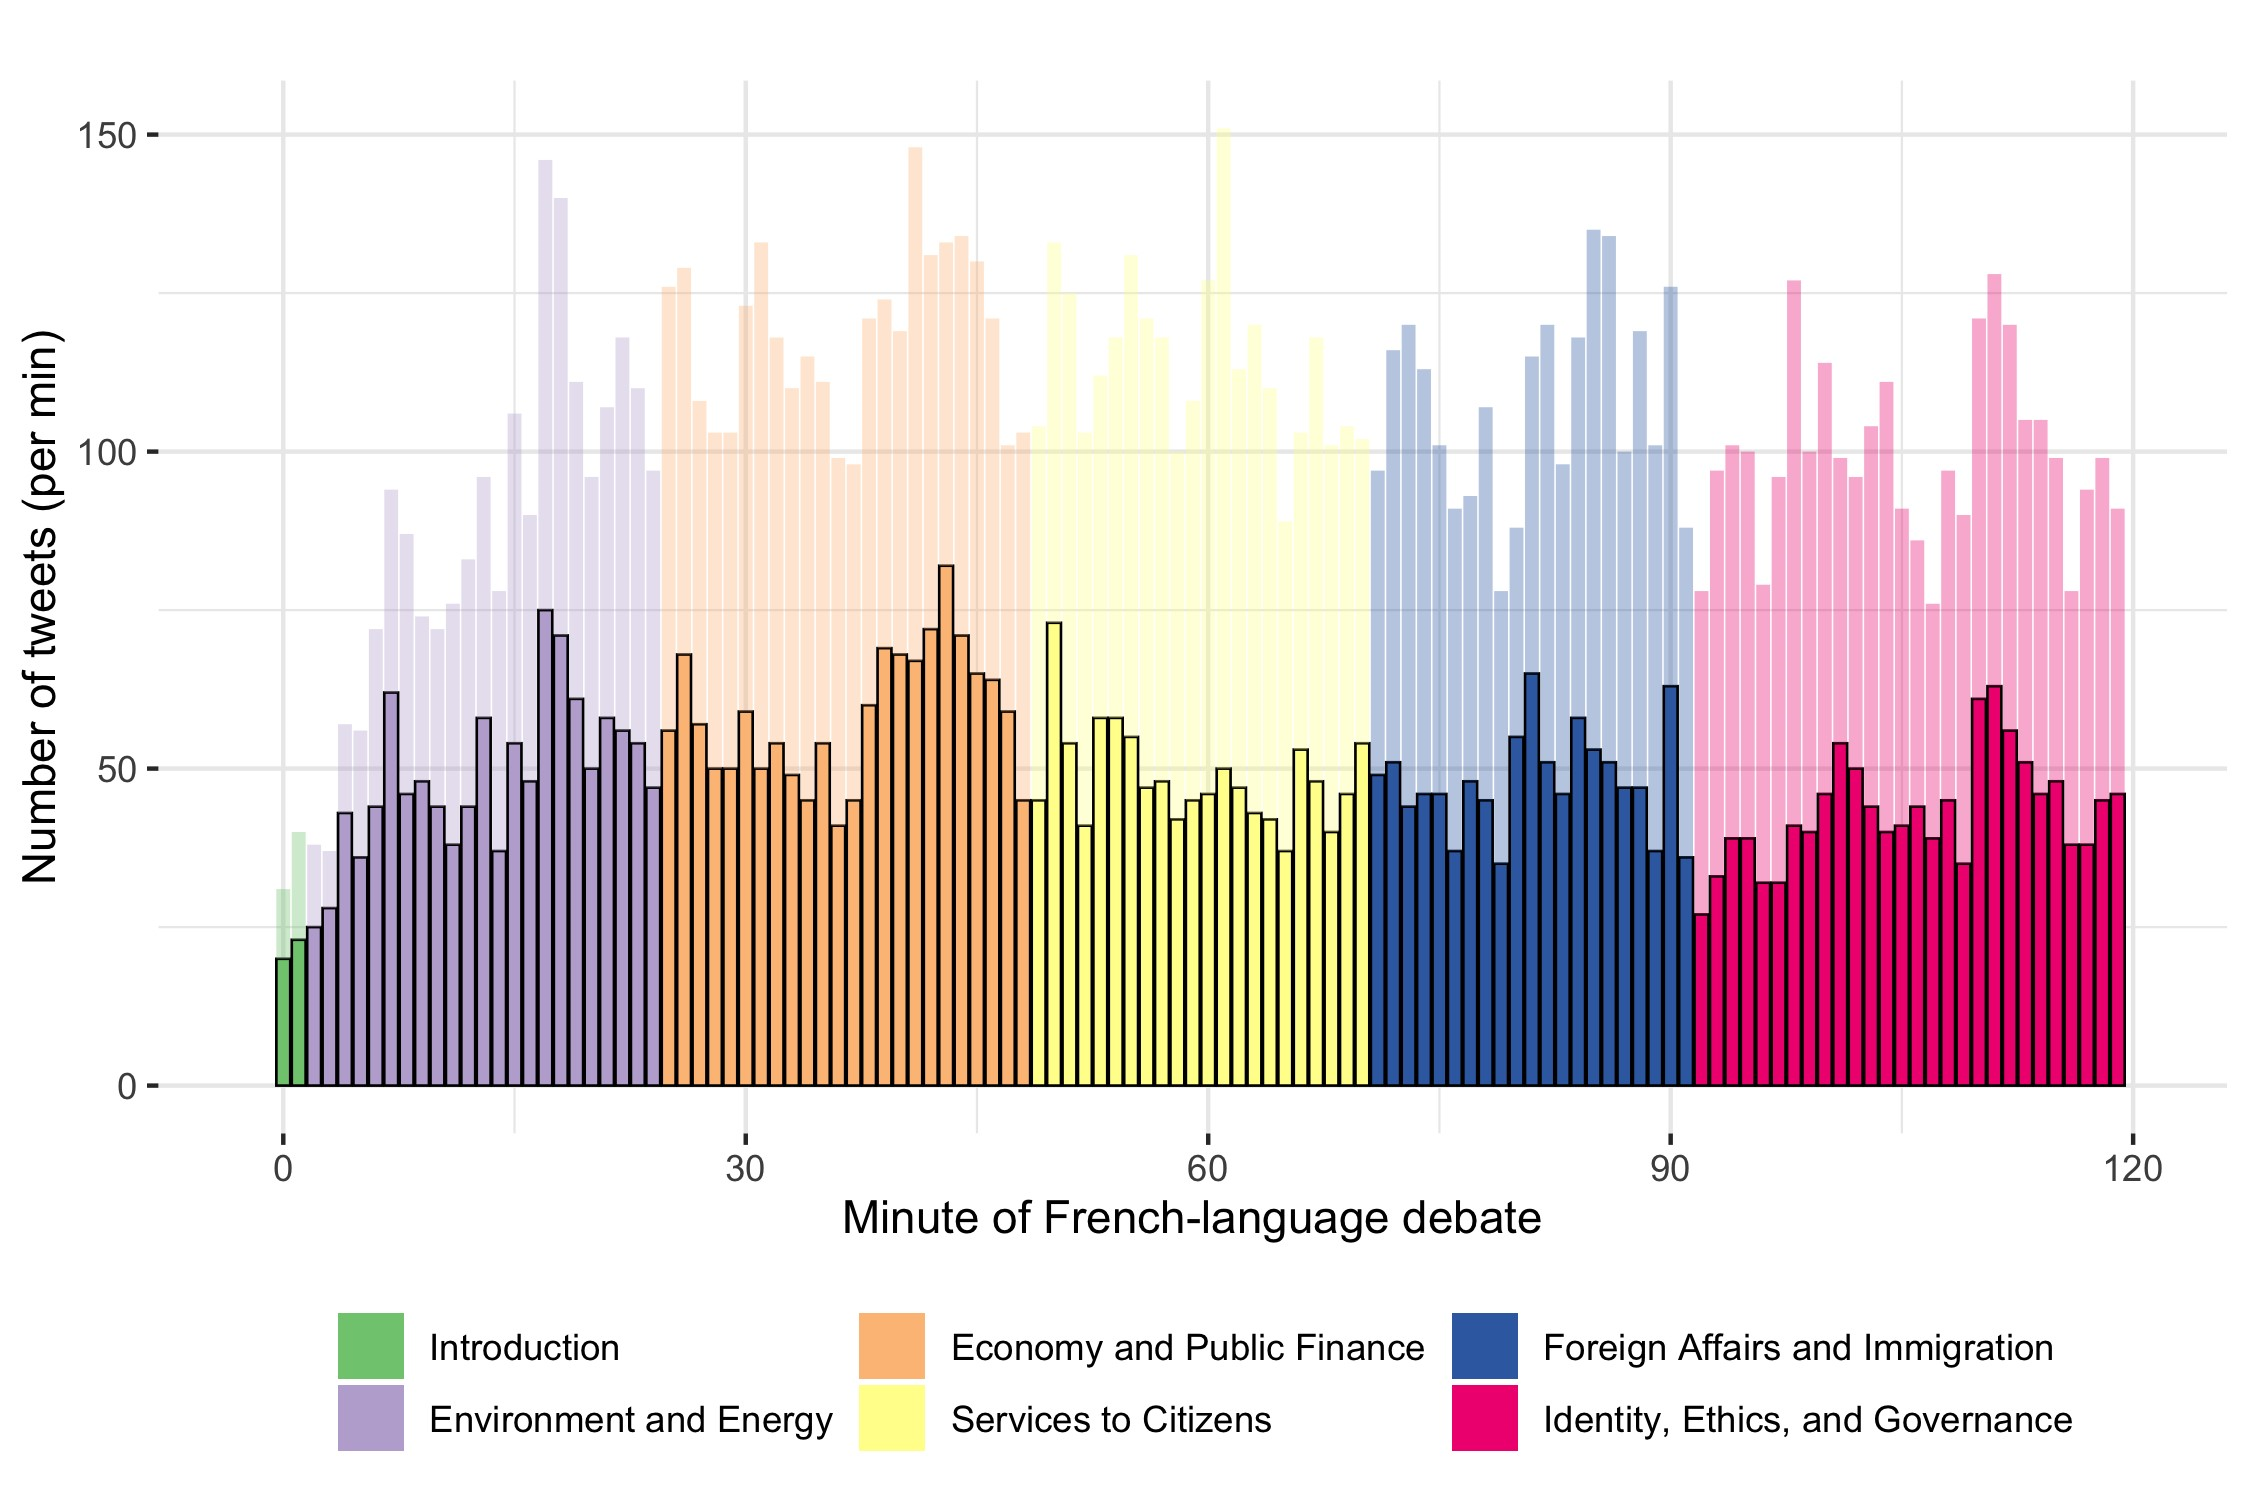 Figure 4: Debate-related Twitter activity during French-language debate